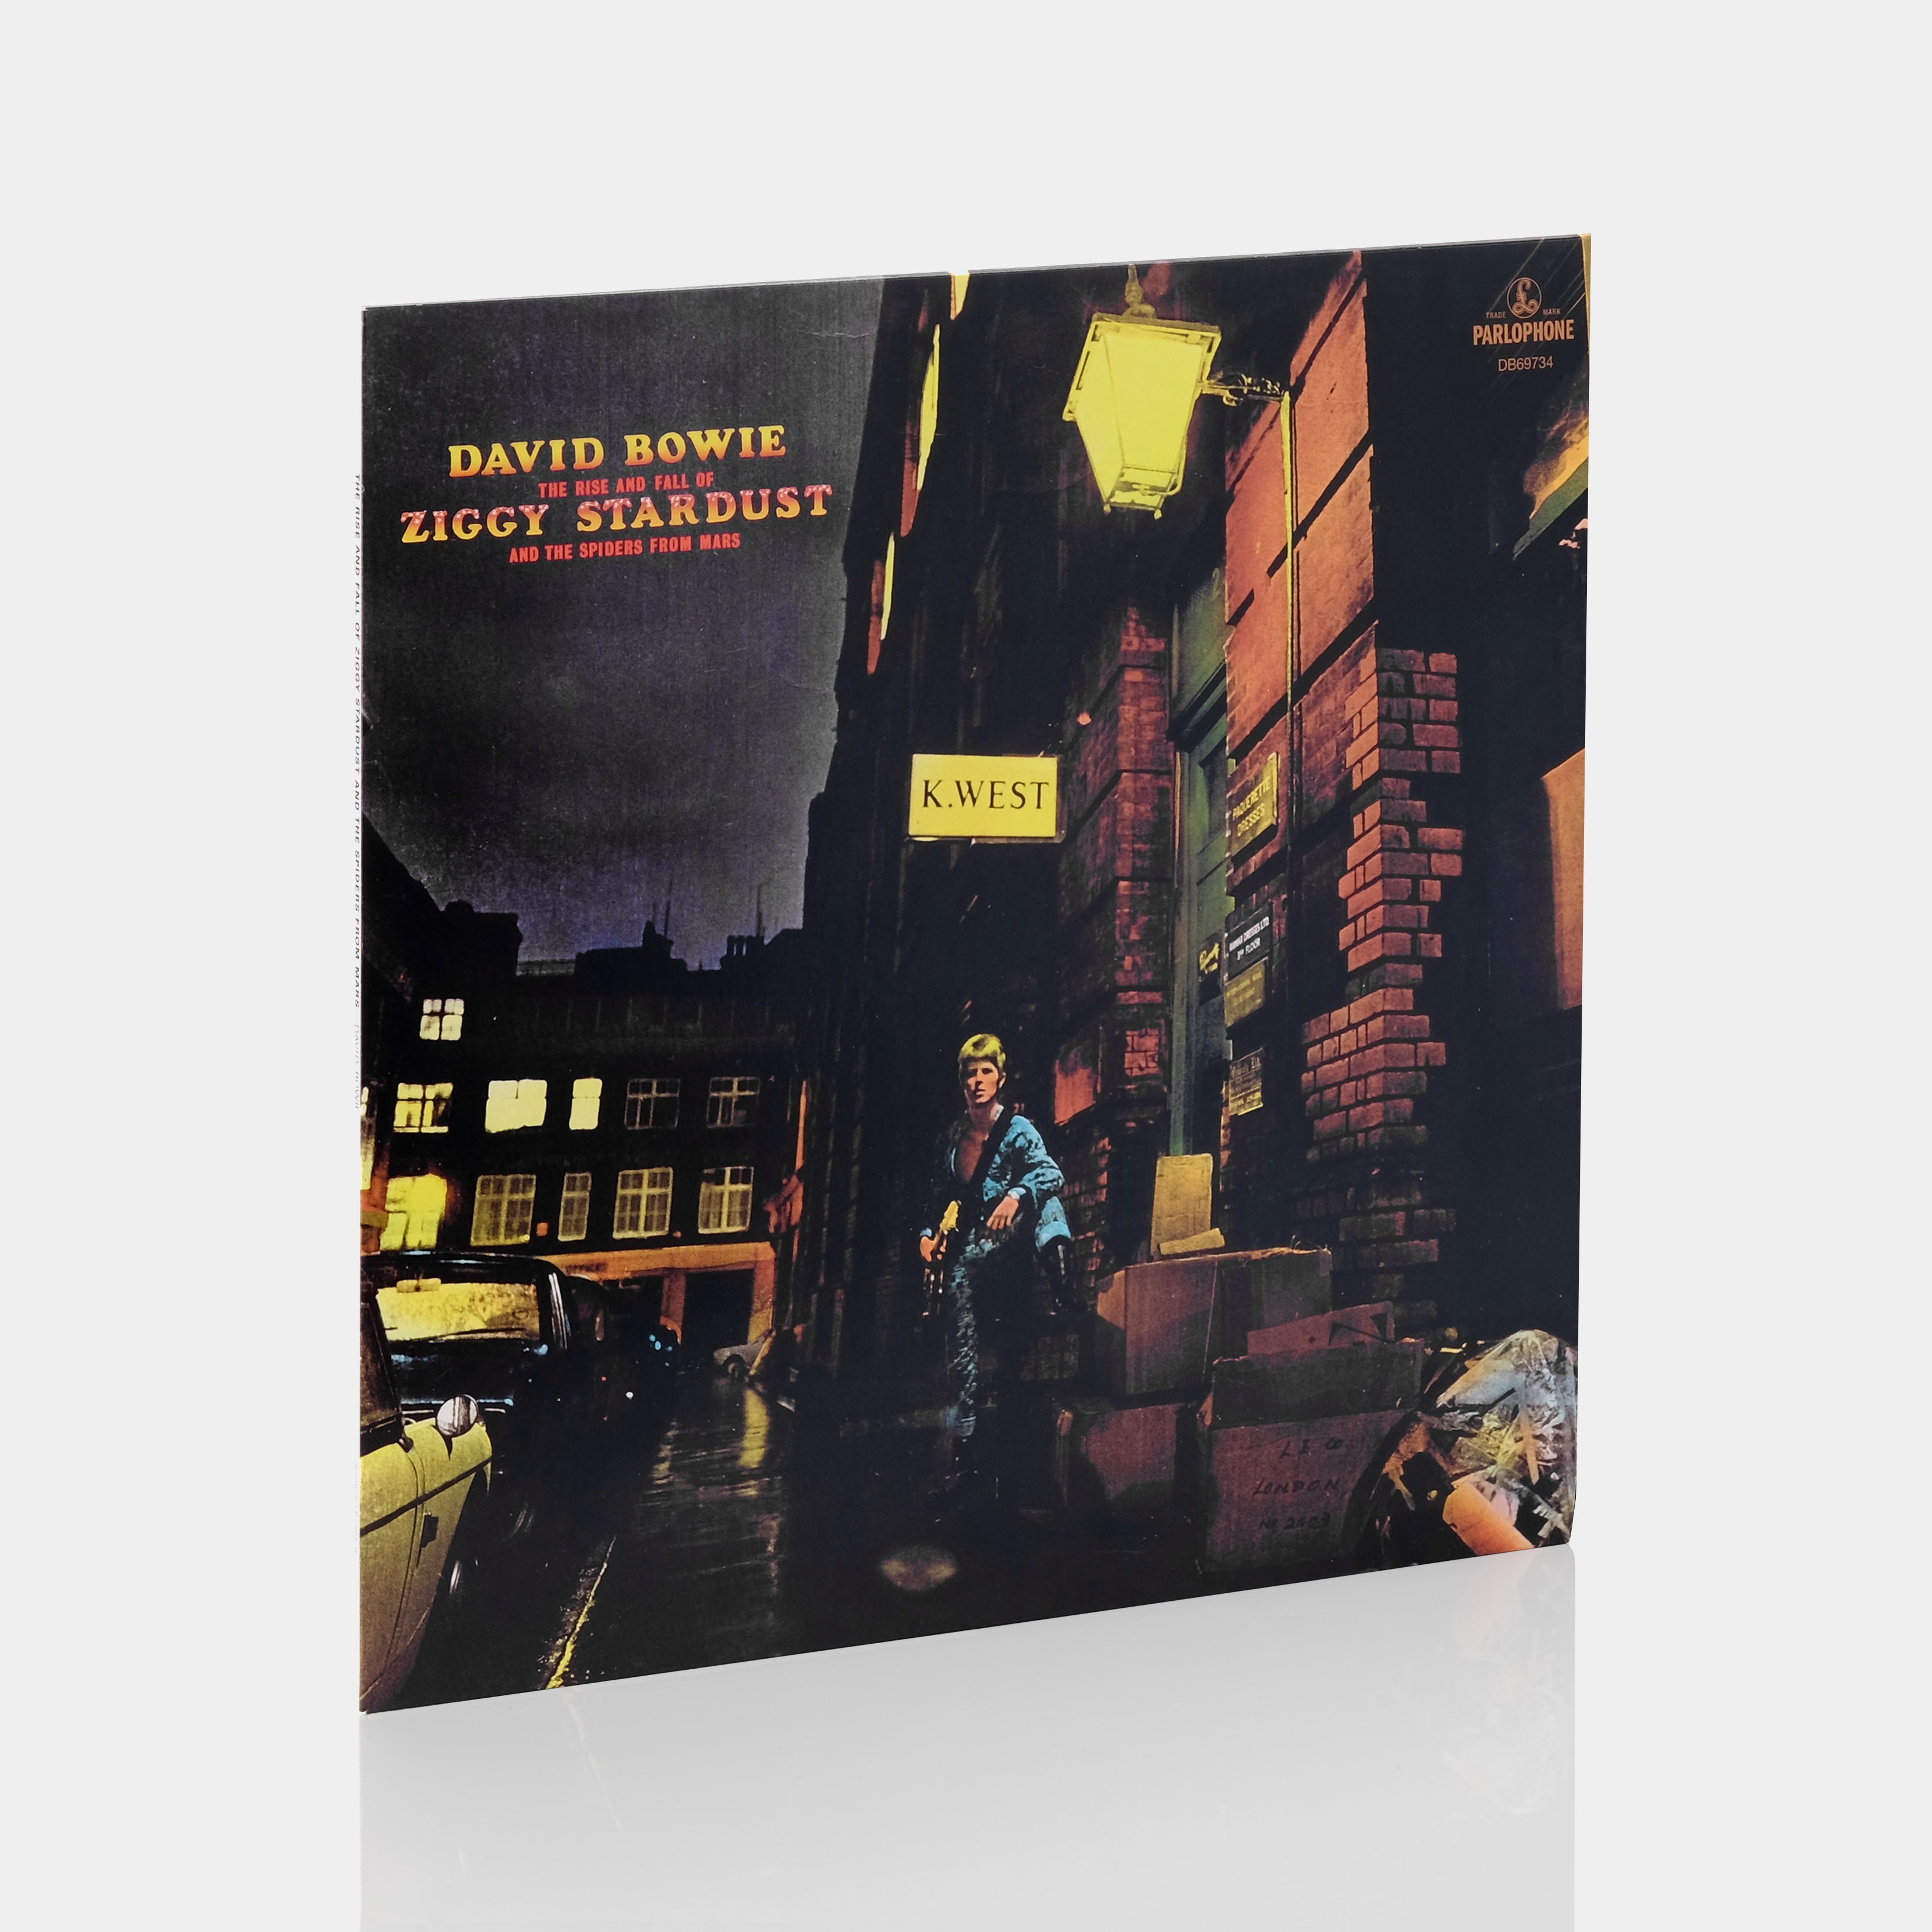 David Bowie - The Rise And Fall Of Ziggy Stardust And The Spiders From Mars LP Vinyl Record